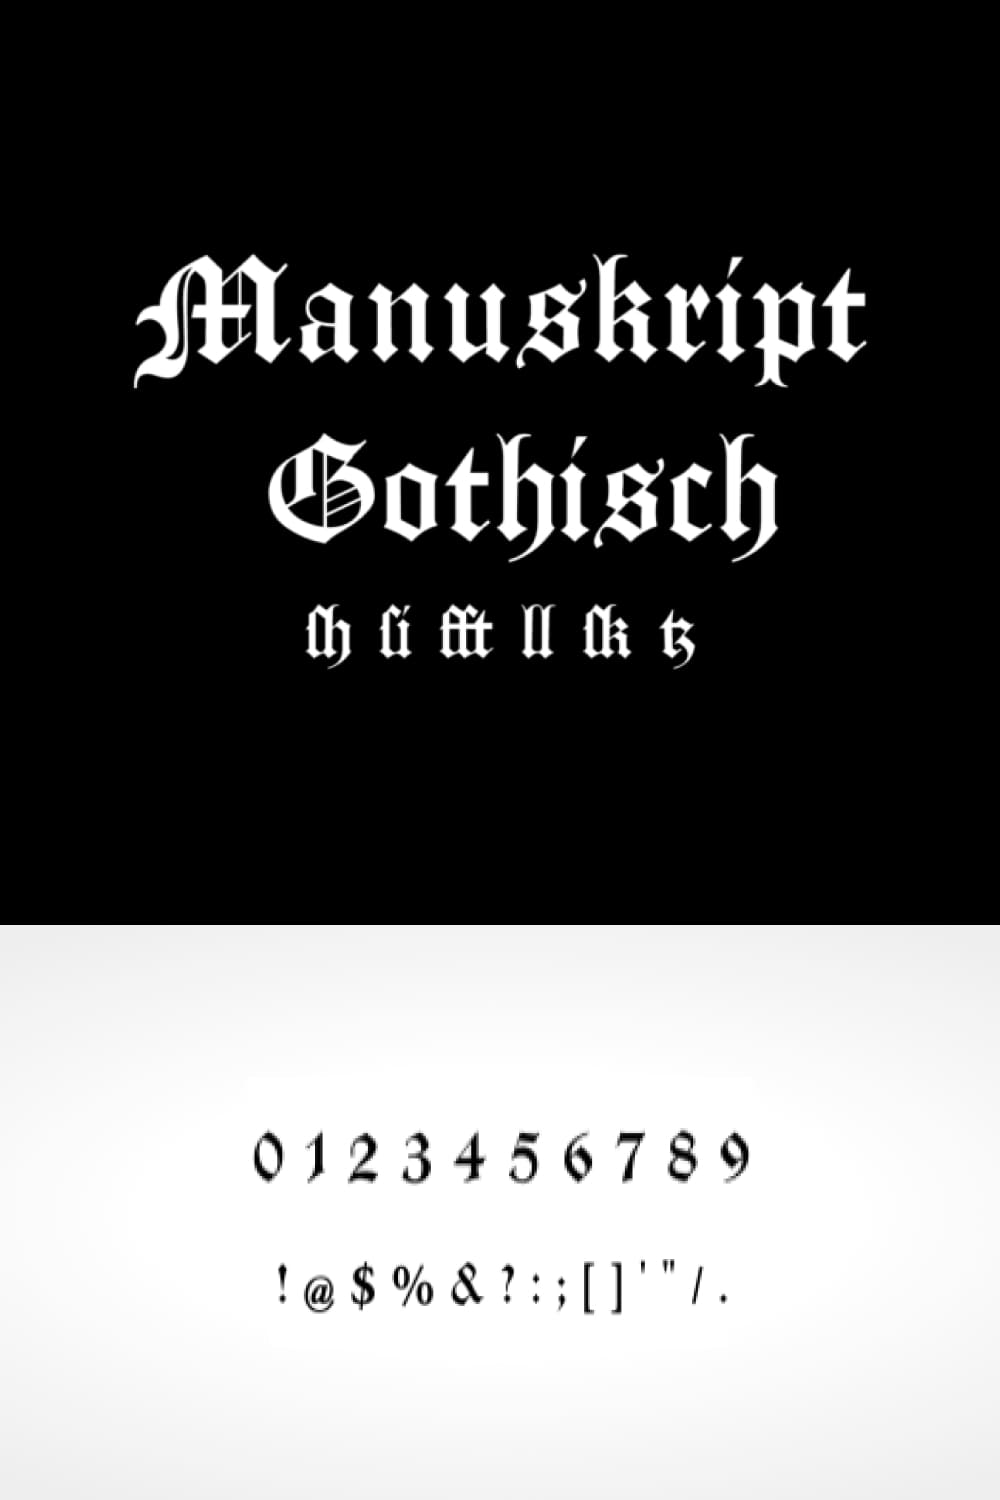 An example of a Manuskript Gothisch Font in white on a black background.